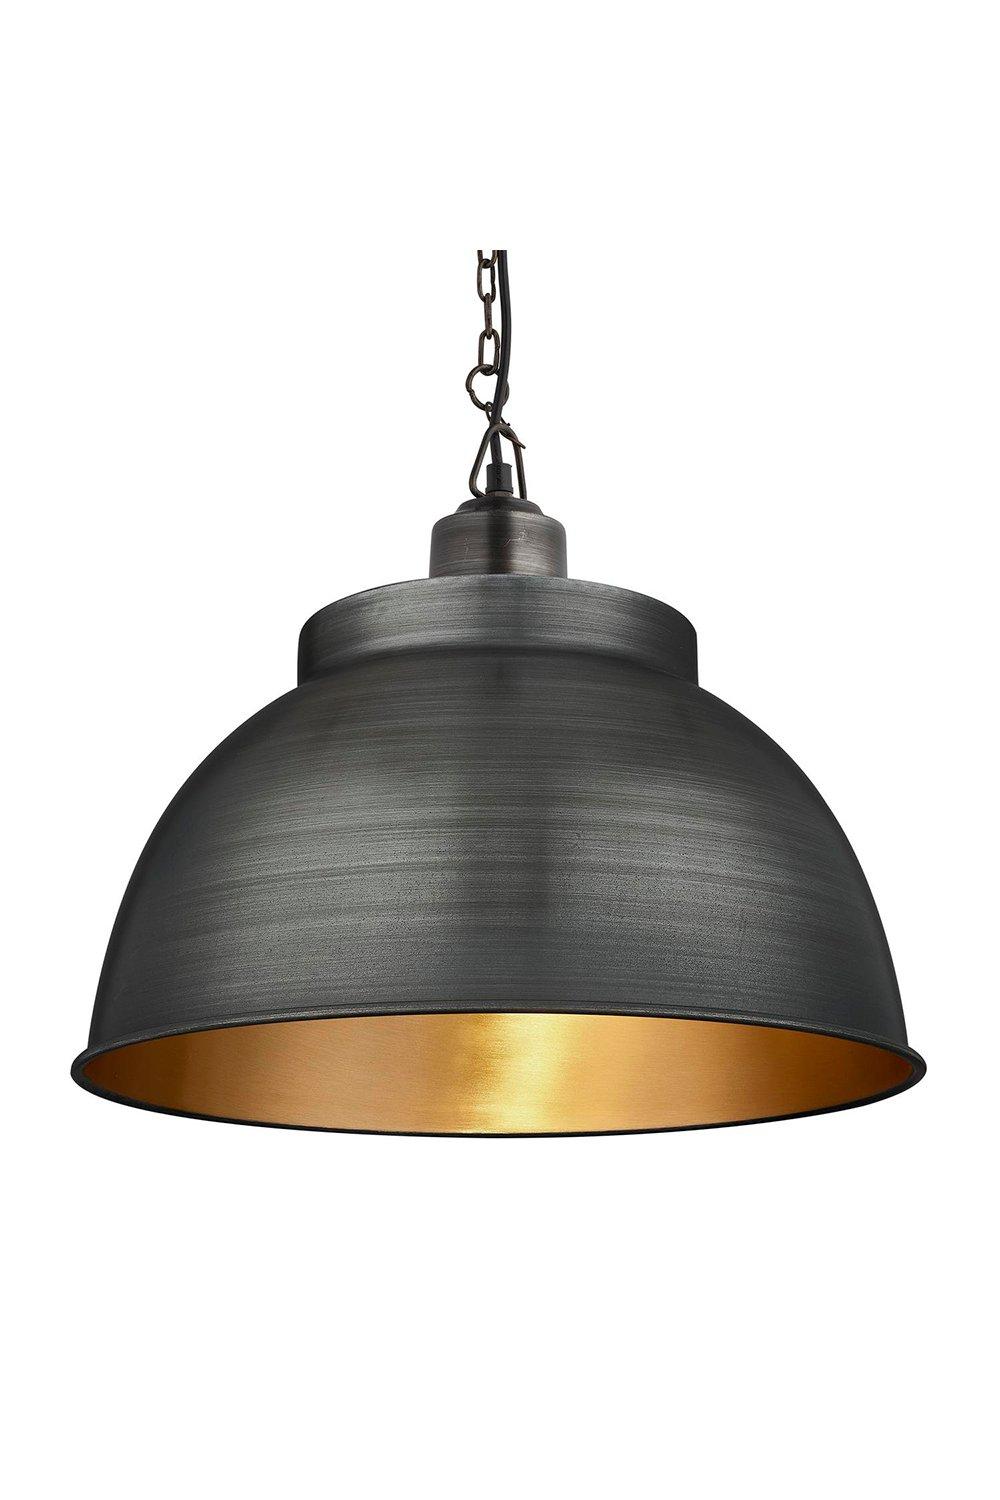 Brooklyn Dome Pendant, 17 Inch, Pewter & Brass, Pewter Chain Holder